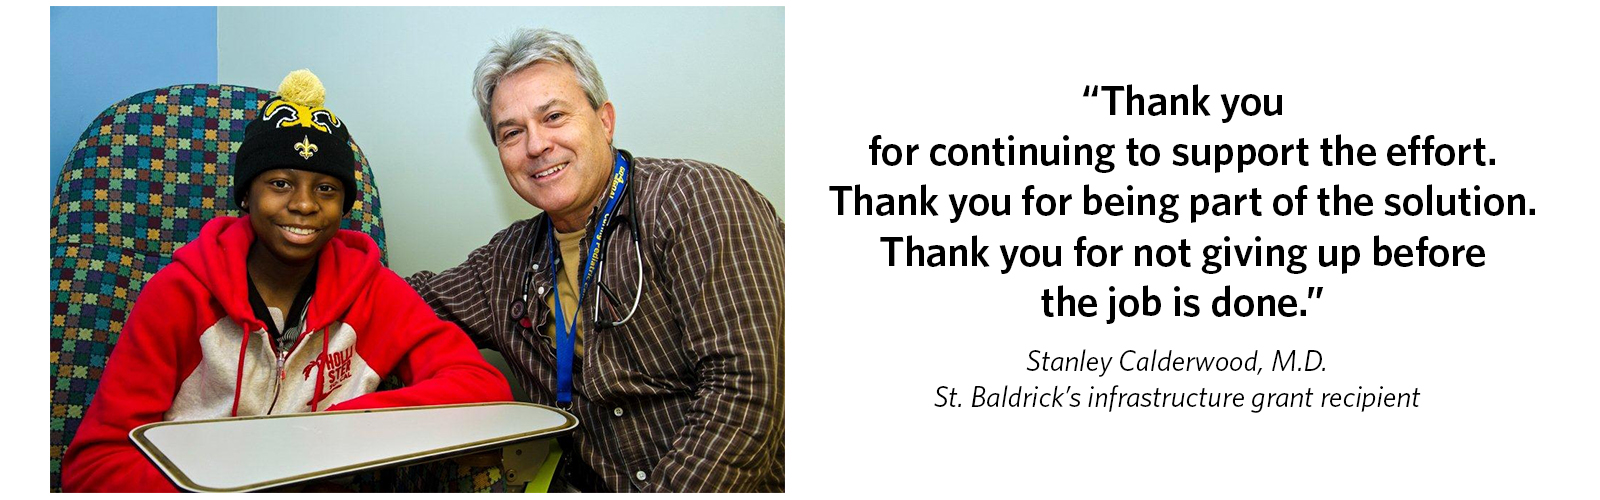 'Thank you for continuing to support the effort. Thank you for being part of the solution. Thank you for not giving up before the job is done.' Stanley Calderwood, M.D., St. Baldrick's infrastructure grant recipient